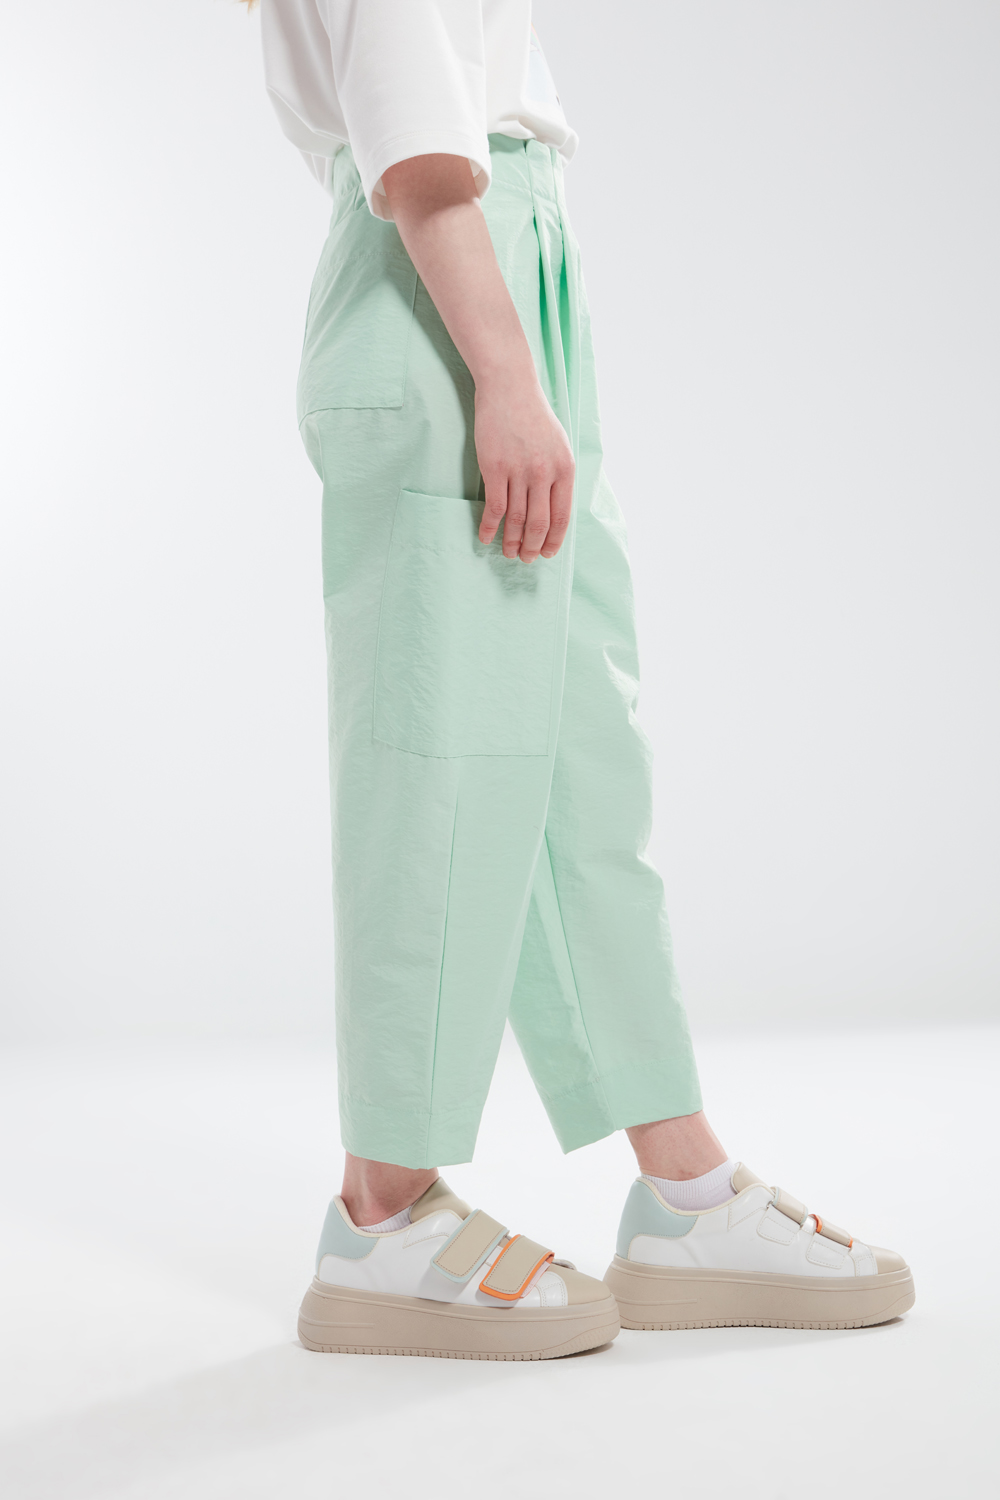 Pocketed Mint Plier Detailed Trousers